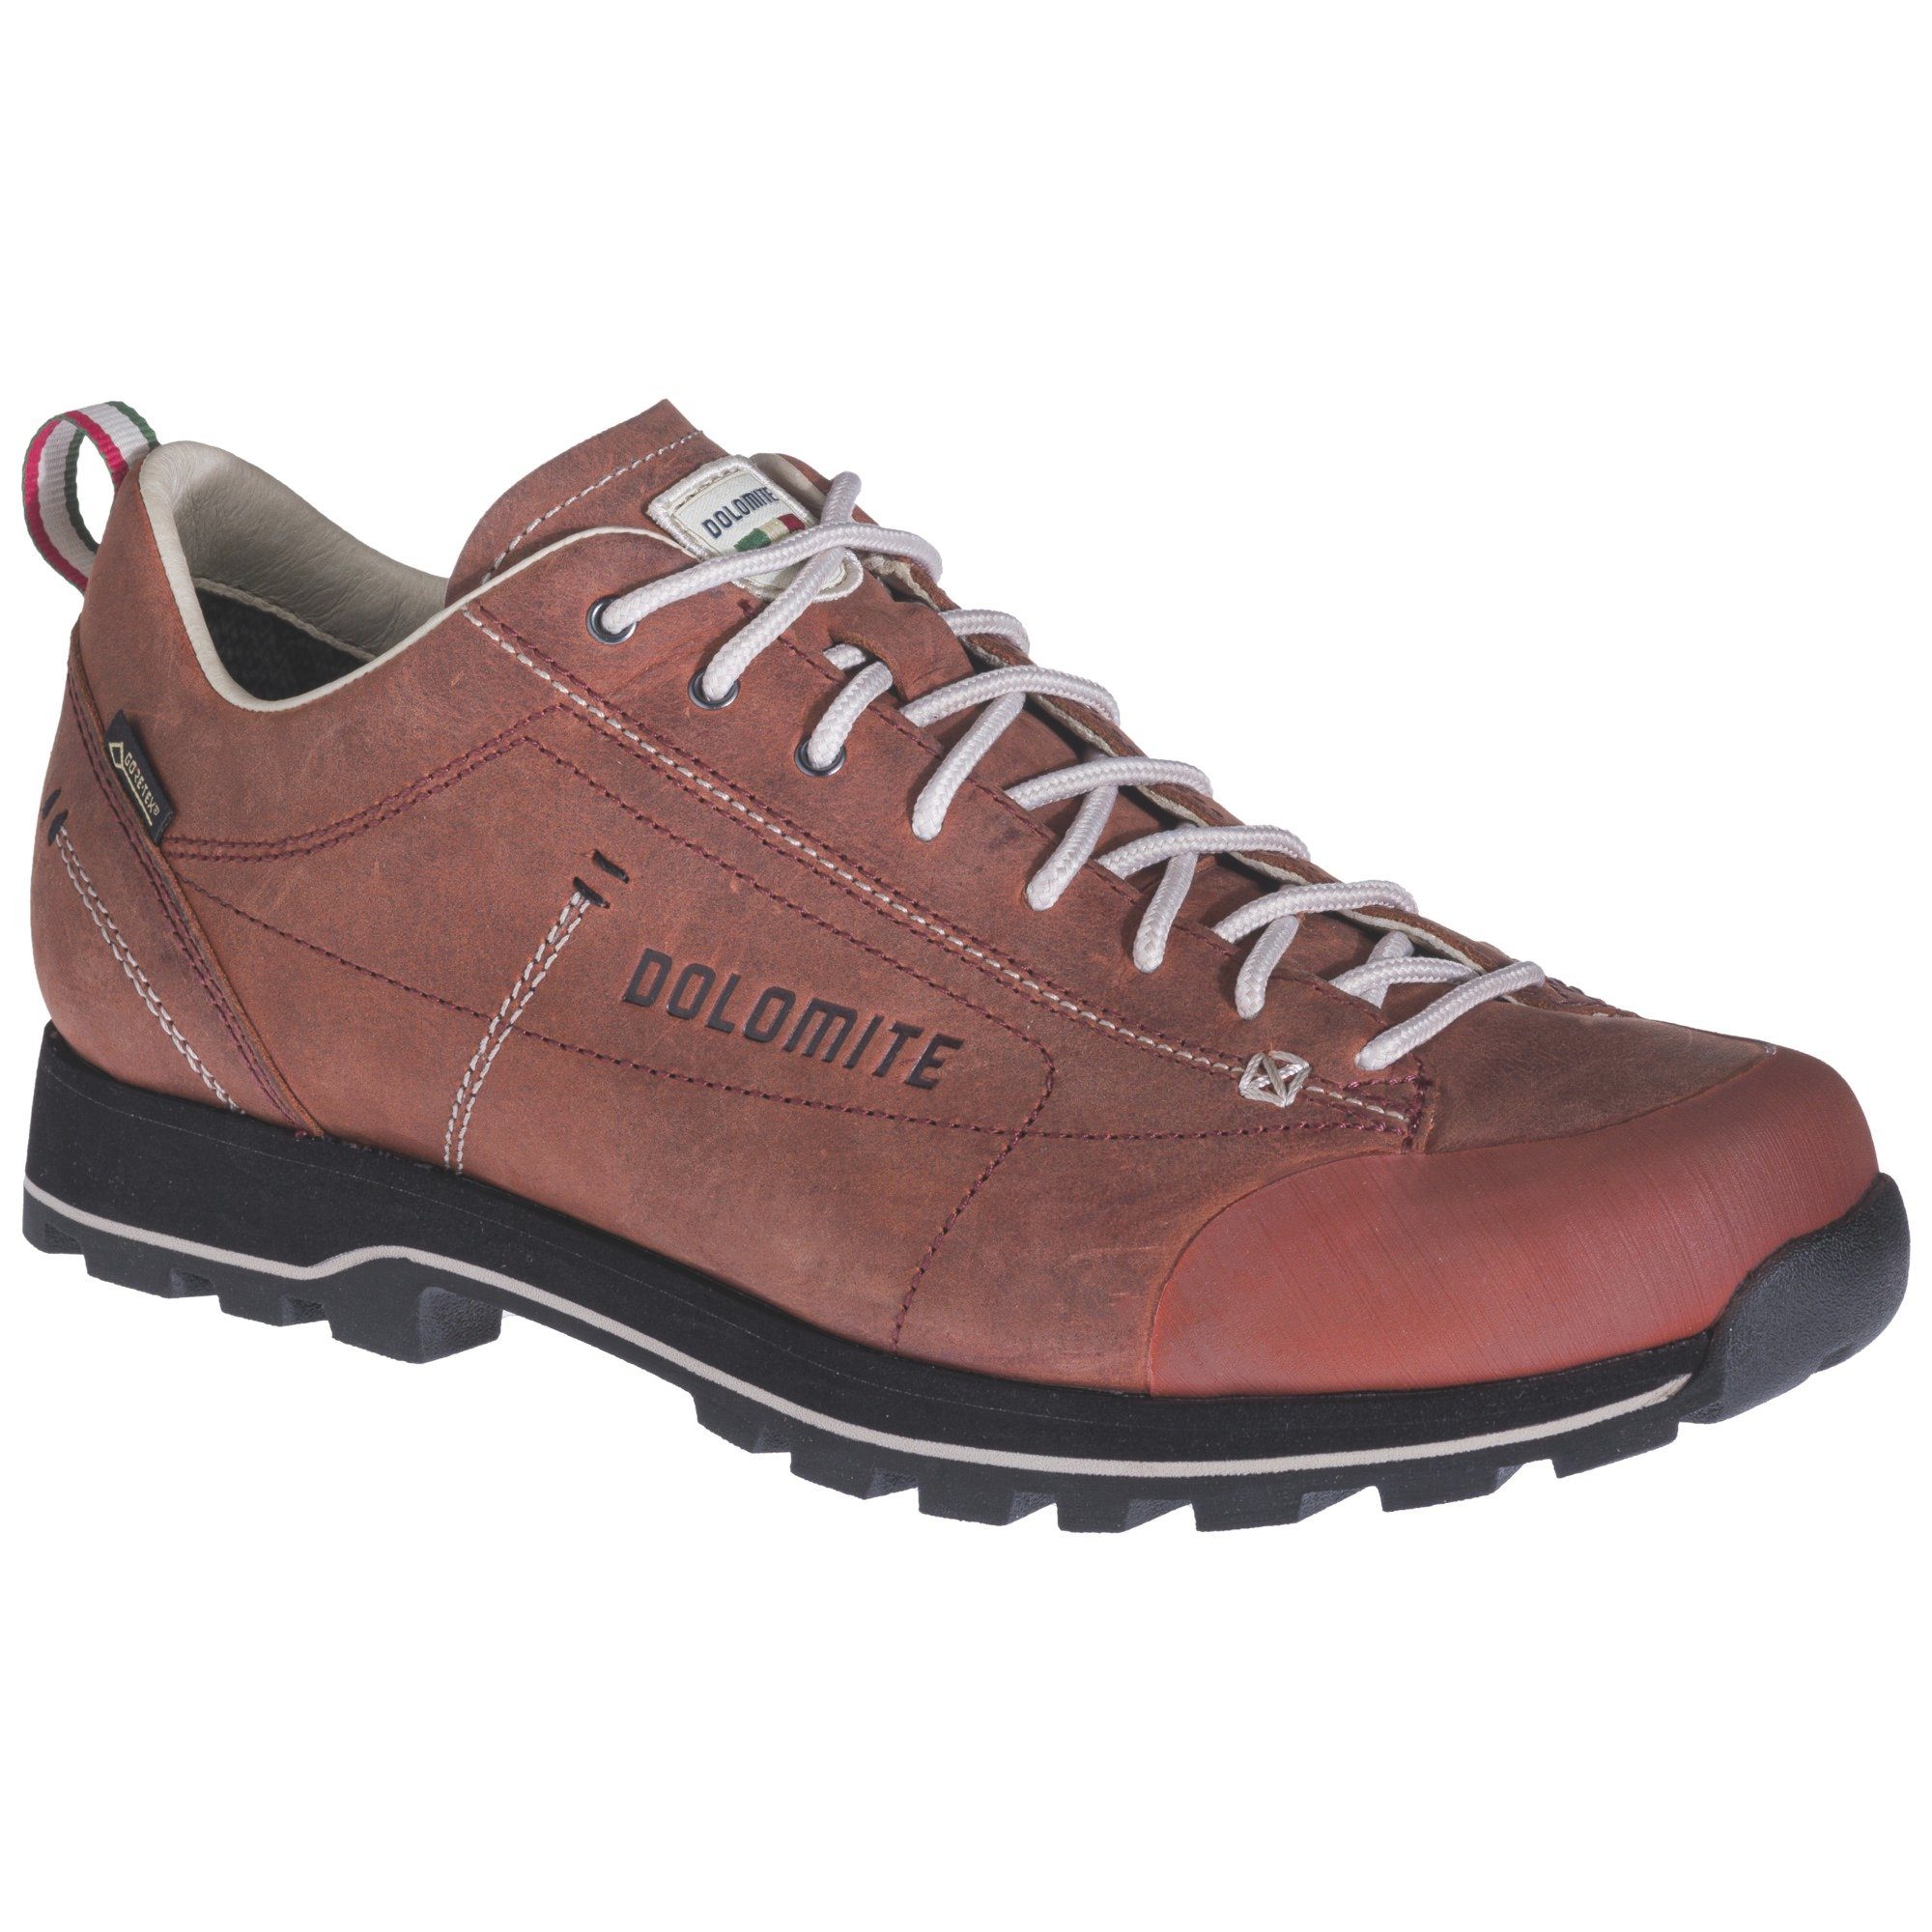 Dolomite Cinquantaquattro Ginger Red Shoe Low Fg Outdoorschuh Dolomite Gt DOL